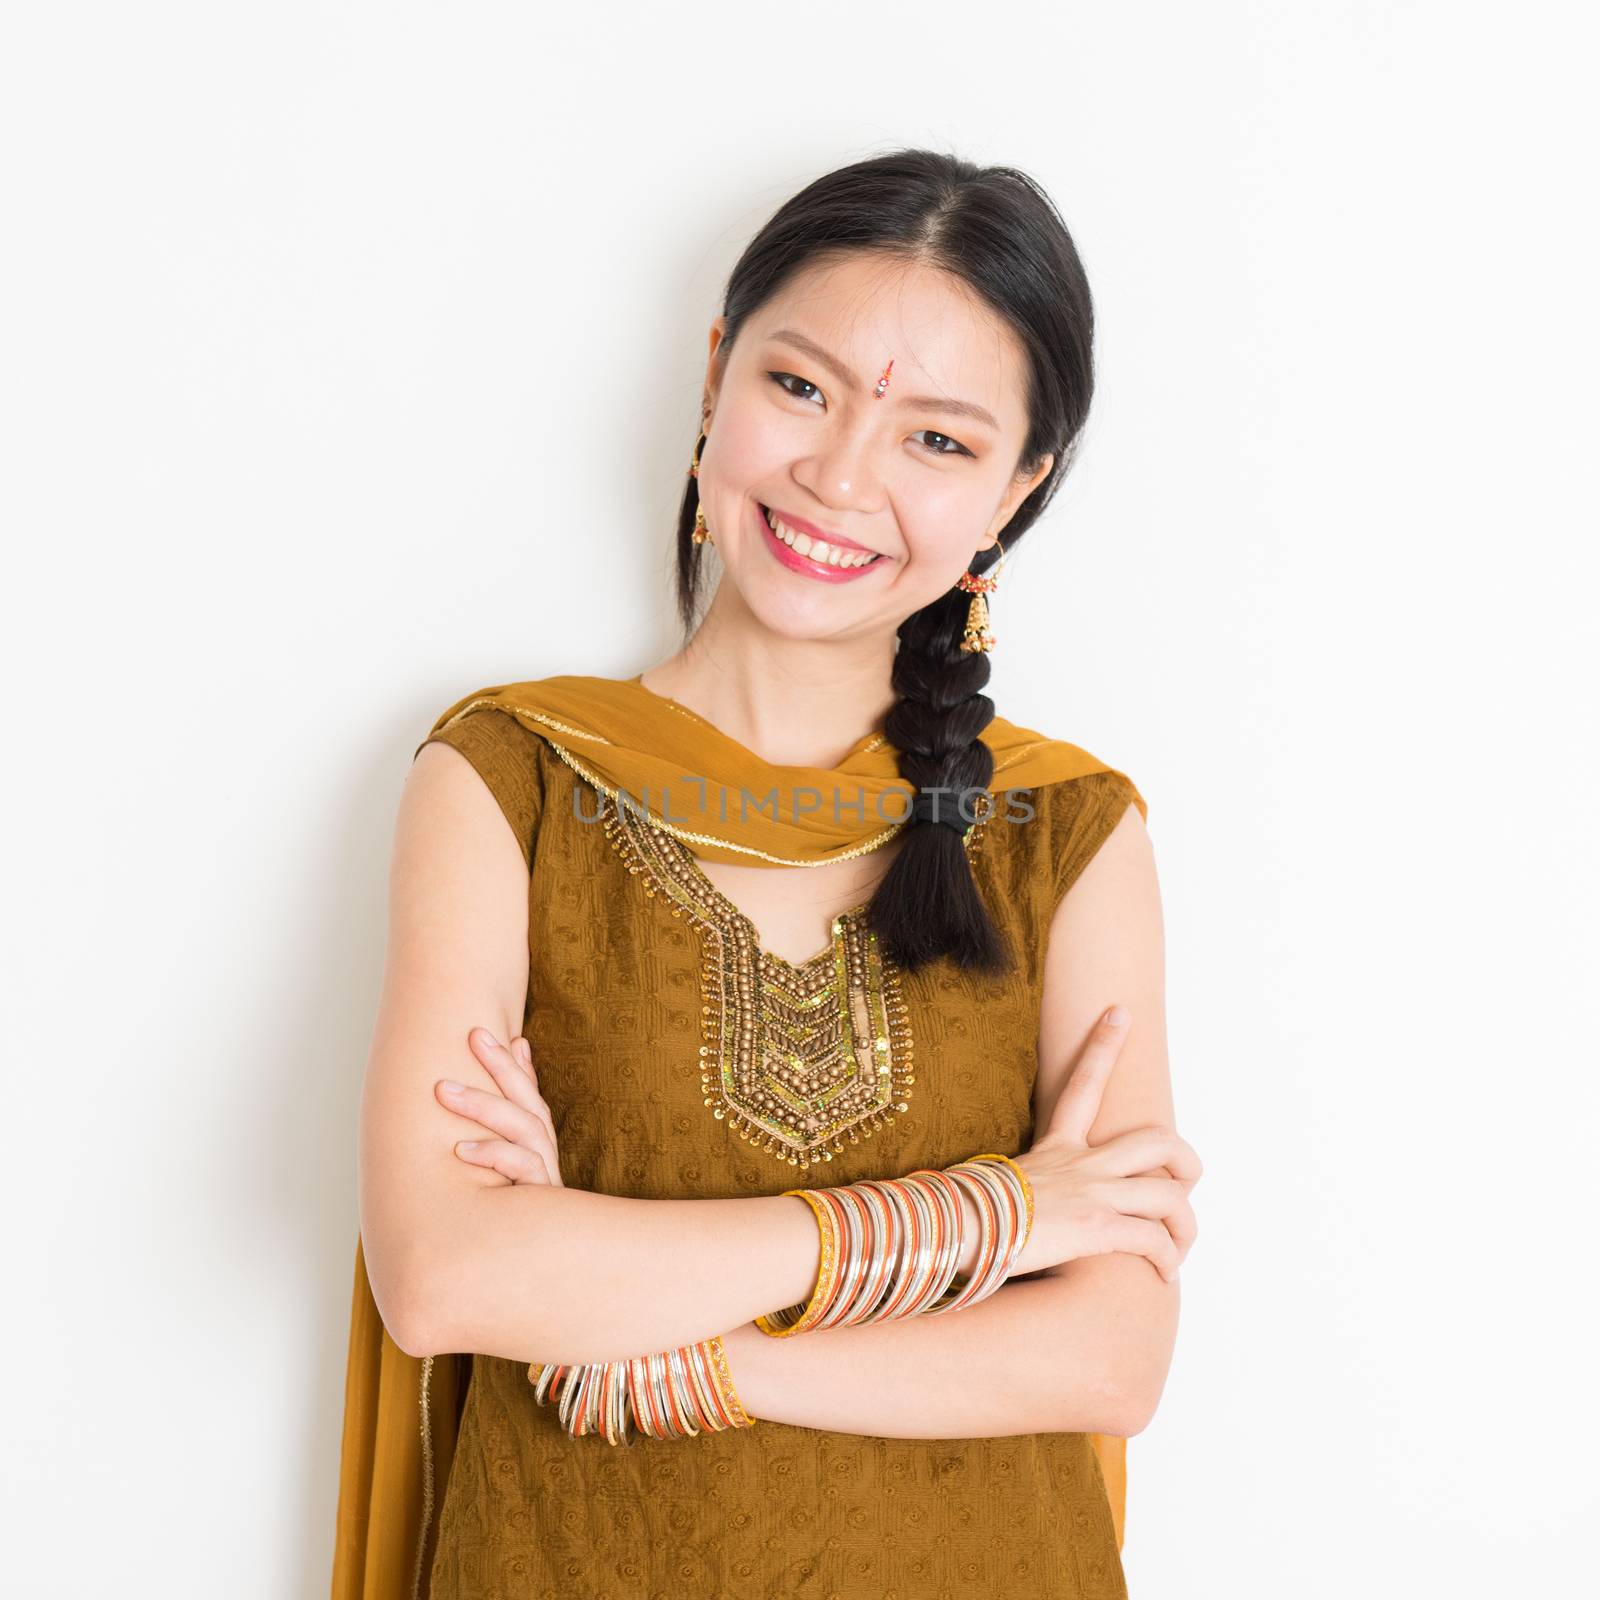 Portrait of arms crossed mixed race Indian Chinese woman in traditional Punjabi dress smiling, standing on plain white background.